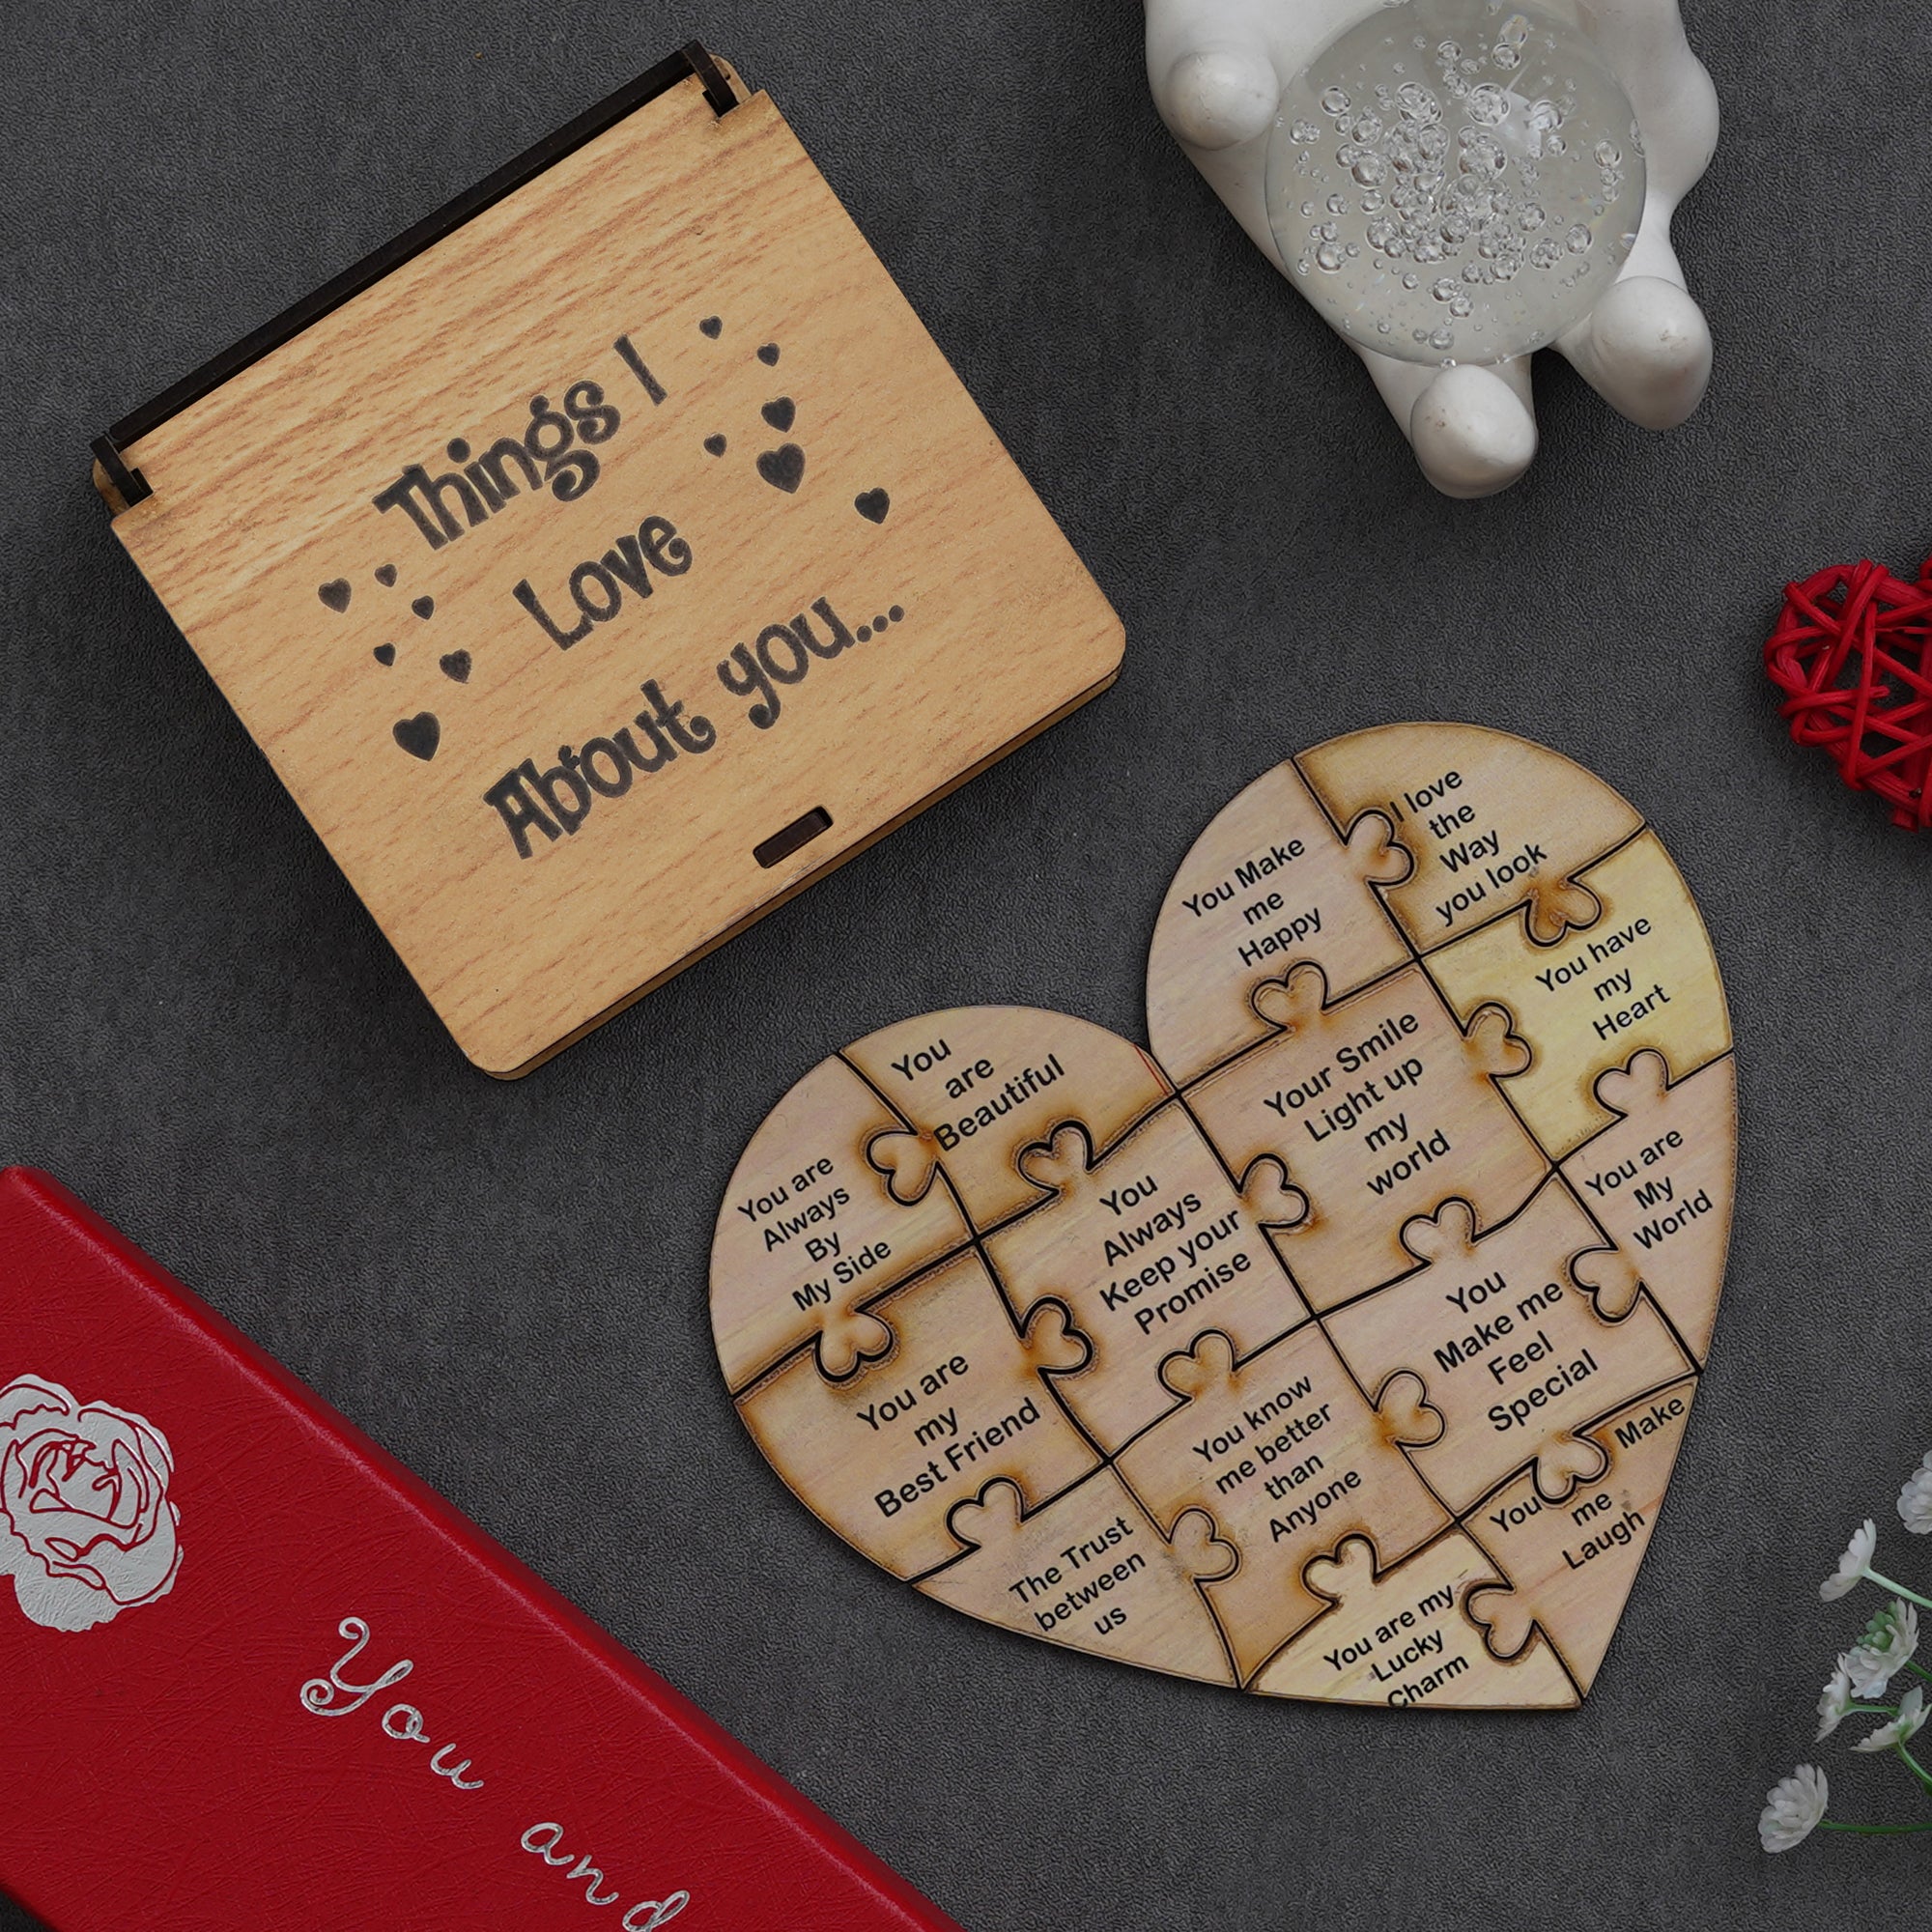 Valentine Combo of Card, Heart Shaped Gift Box Set with White Teddy and Red Roses, "Things I Love About You" Puzzle Wooden Gift Set 5